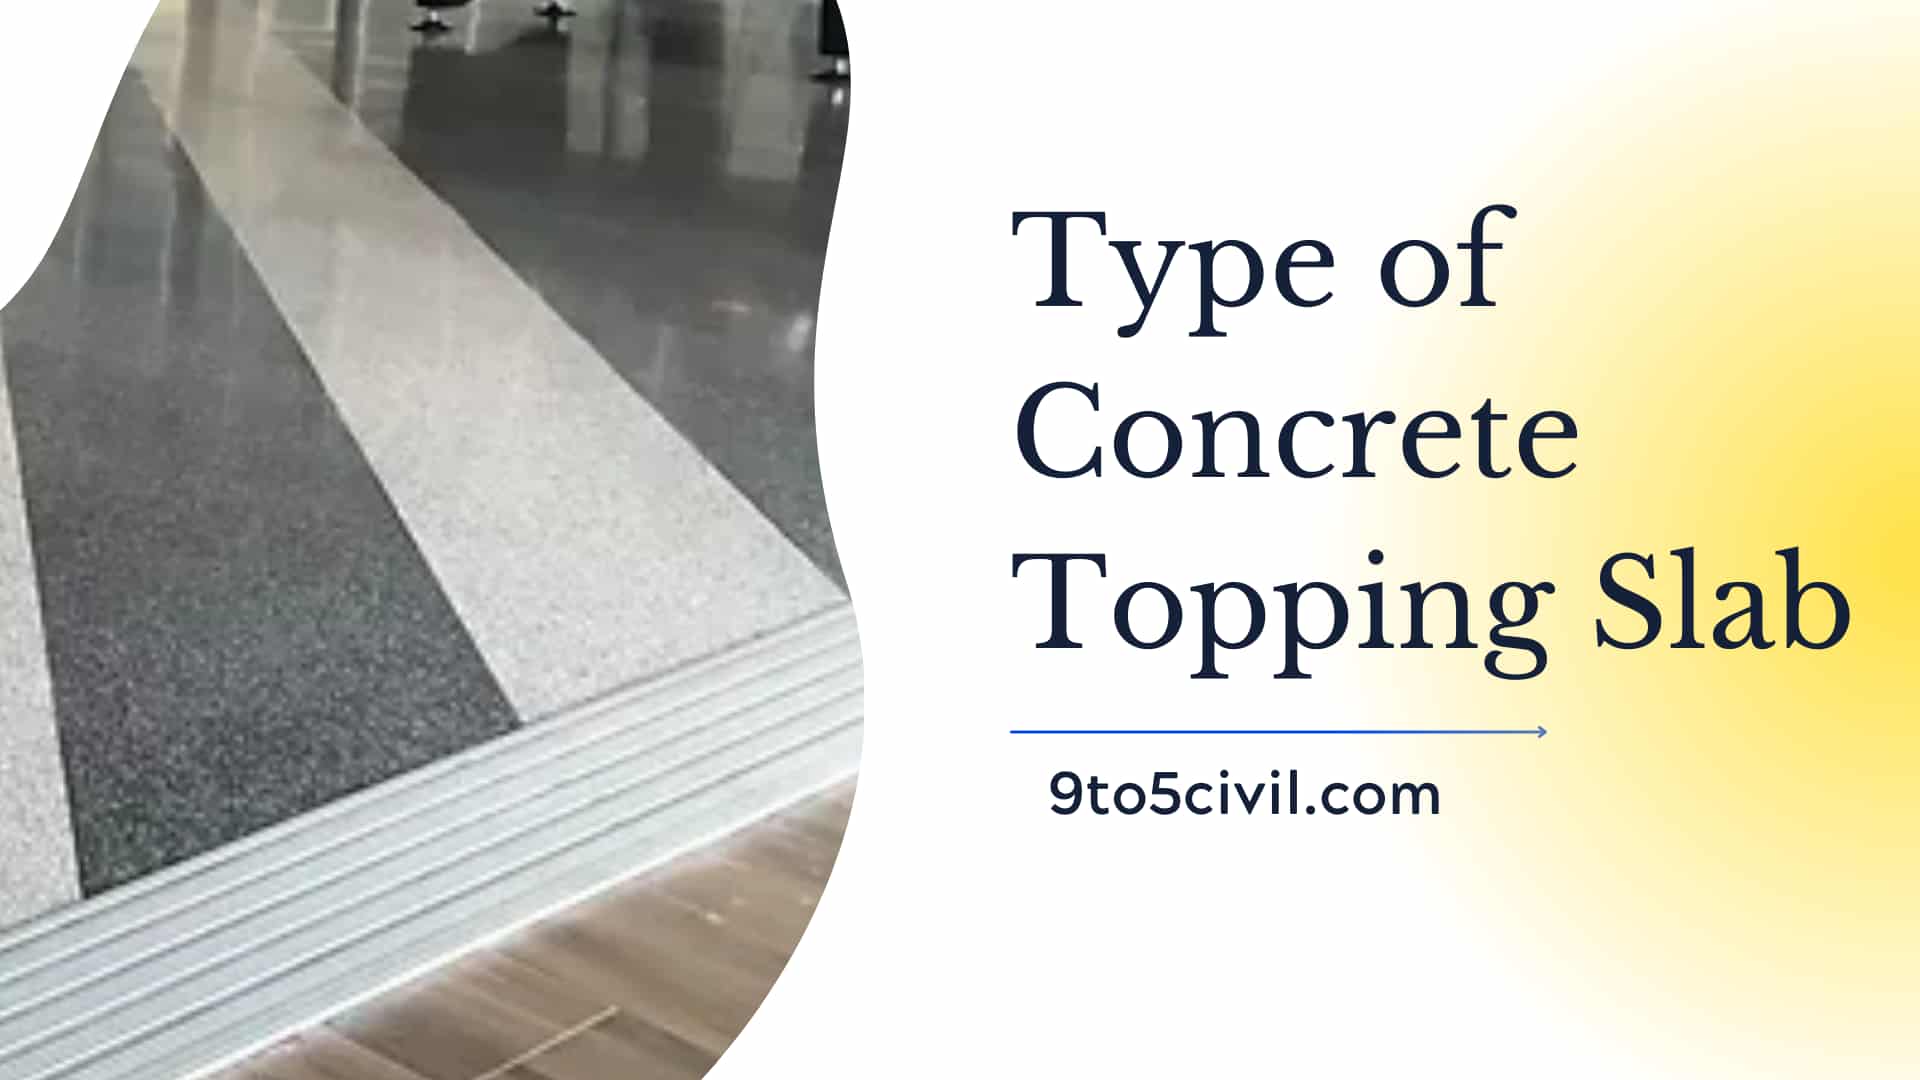 Type of Concrete Topping Slab